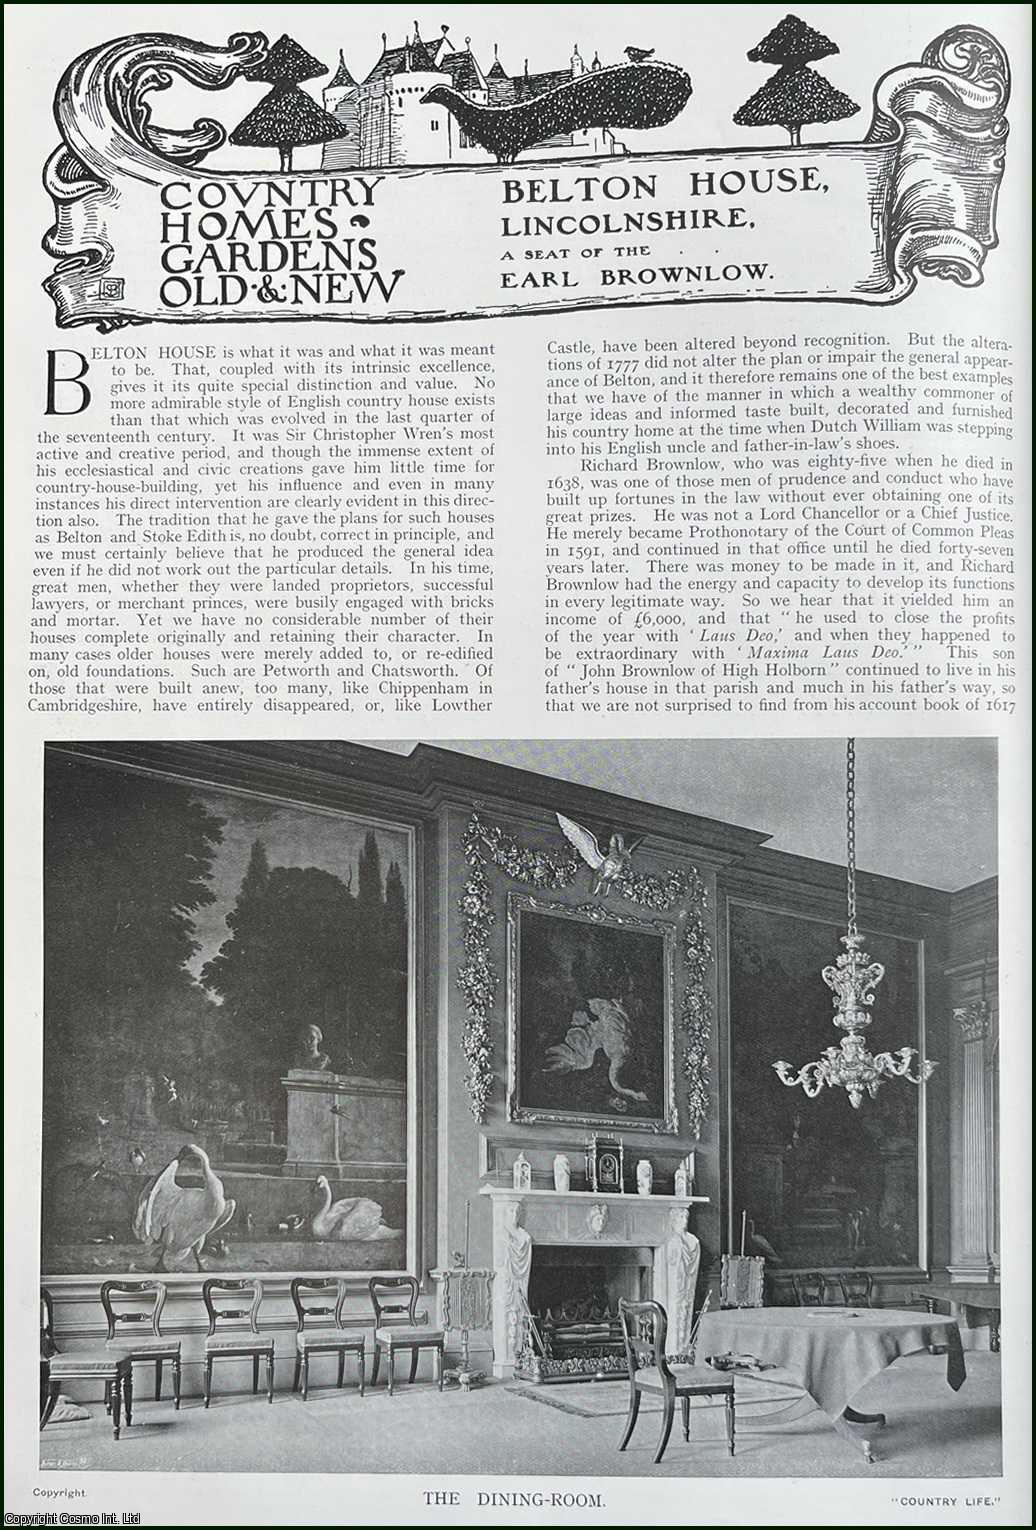 Country Life Magazine - Belton House, Lincolnshire. Several pictures and accompanying text, removed from an original issue of Country Life Magazine, 1911.